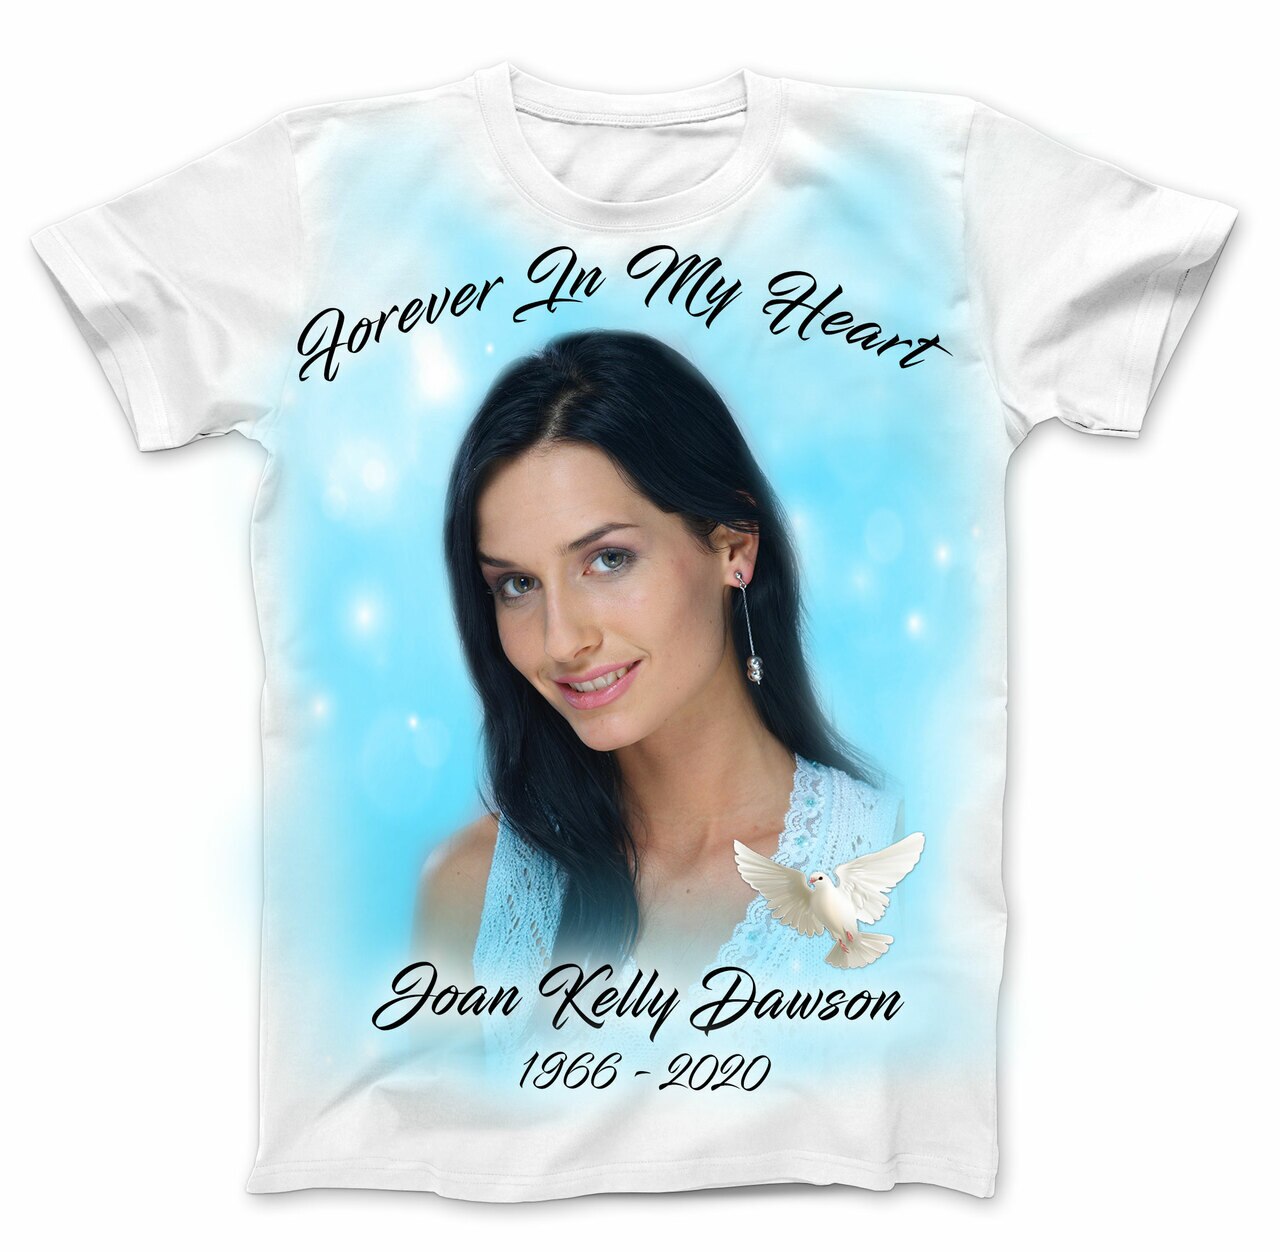 Customized Rest in Peace Funeral T-Shirts - Custom Funeral T